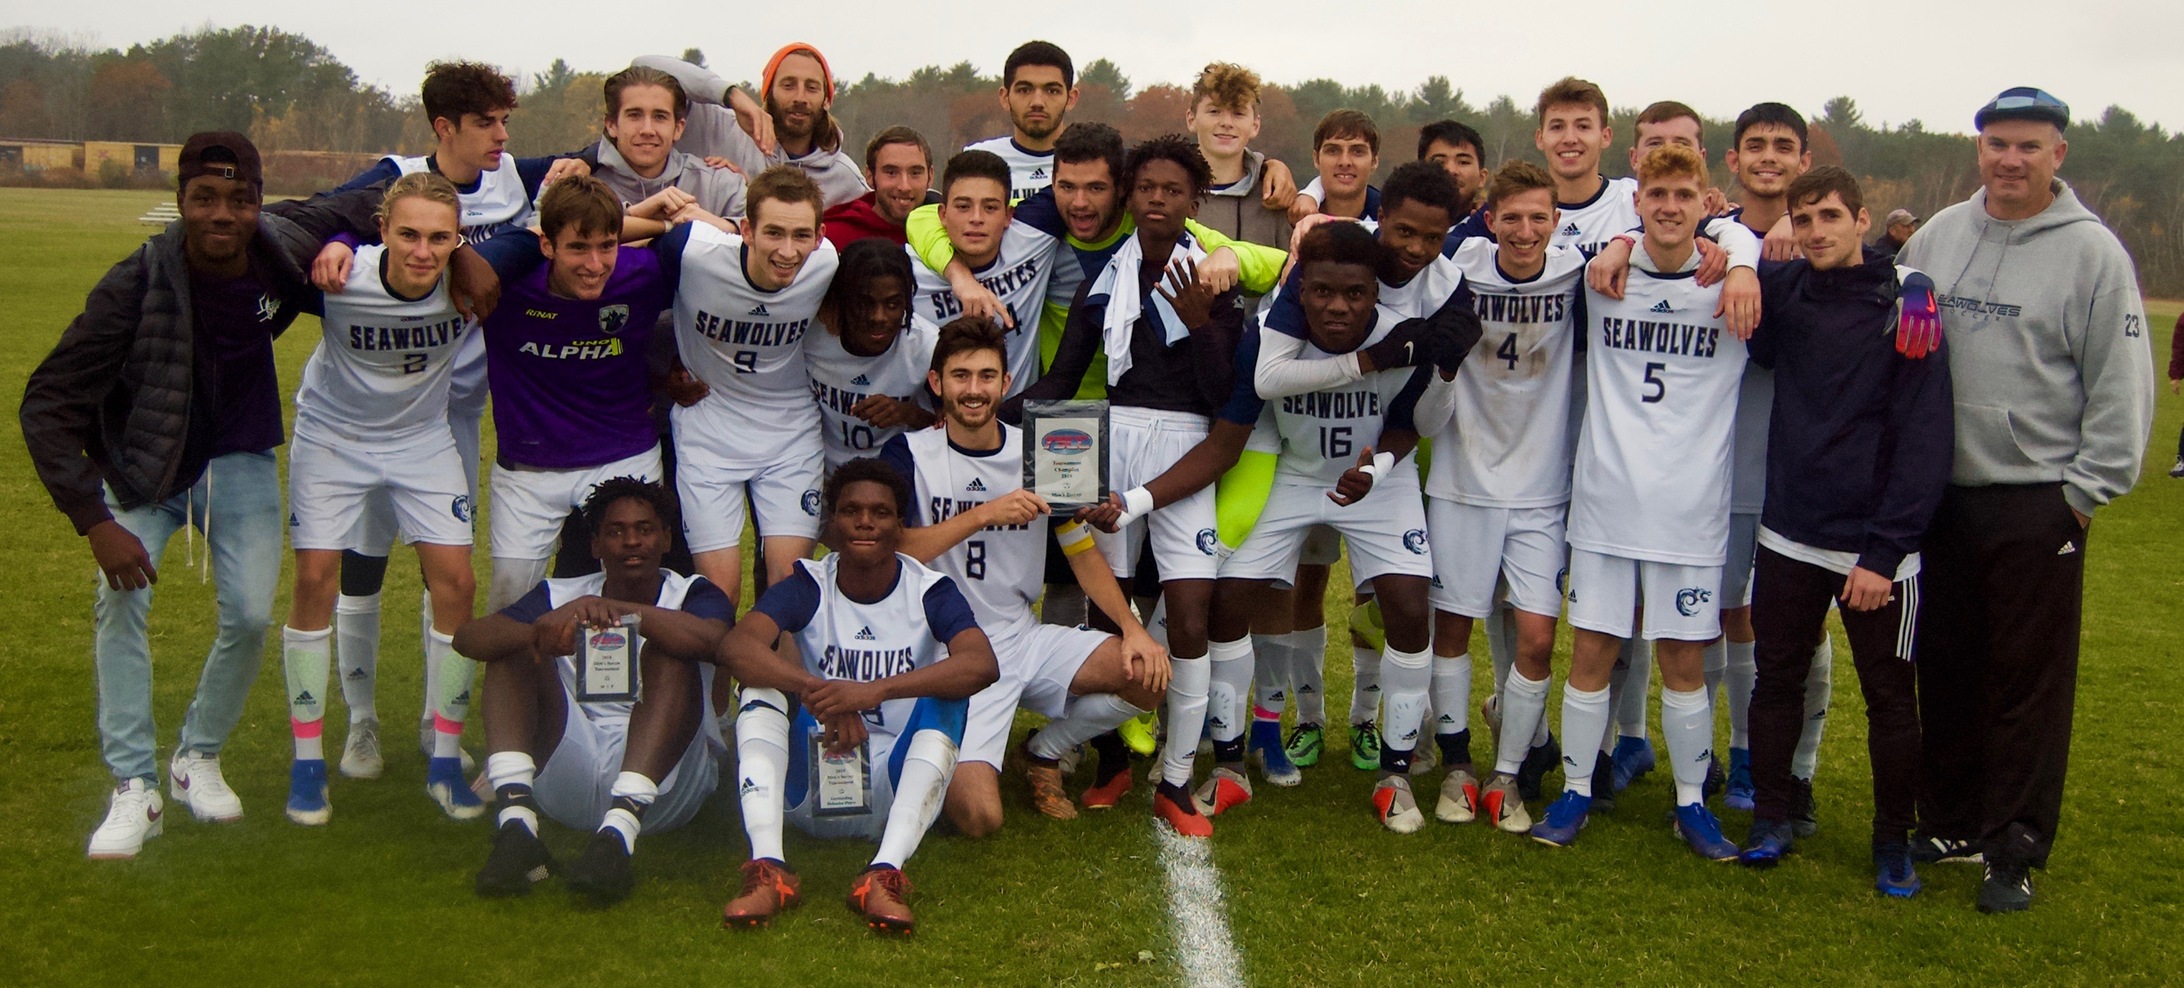 Men’s Soccer Captures First YSCC Title In 7 Years, Earns Auto-Bid To Nationals